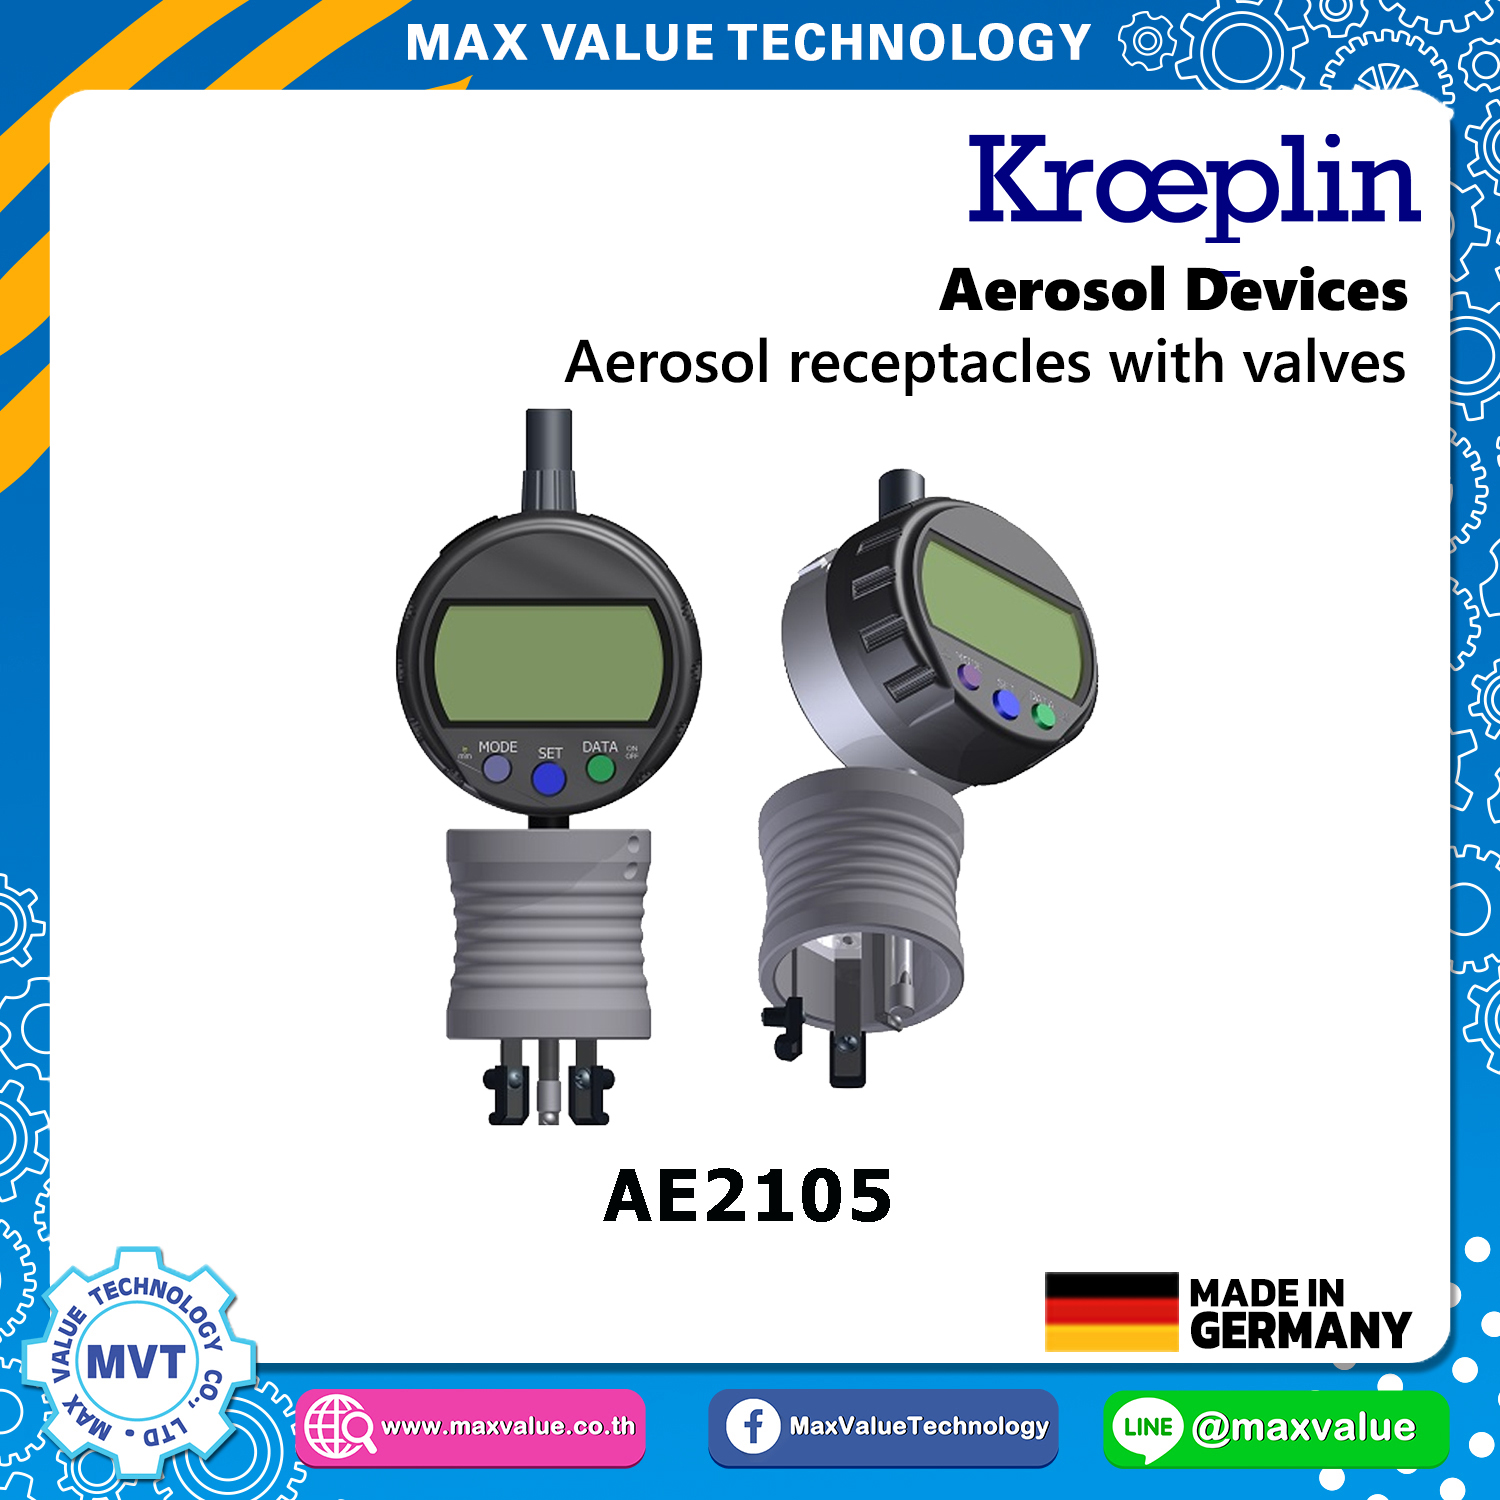 A2105/AE2105 - Aerosol devices - Aerosol receptacles with valves